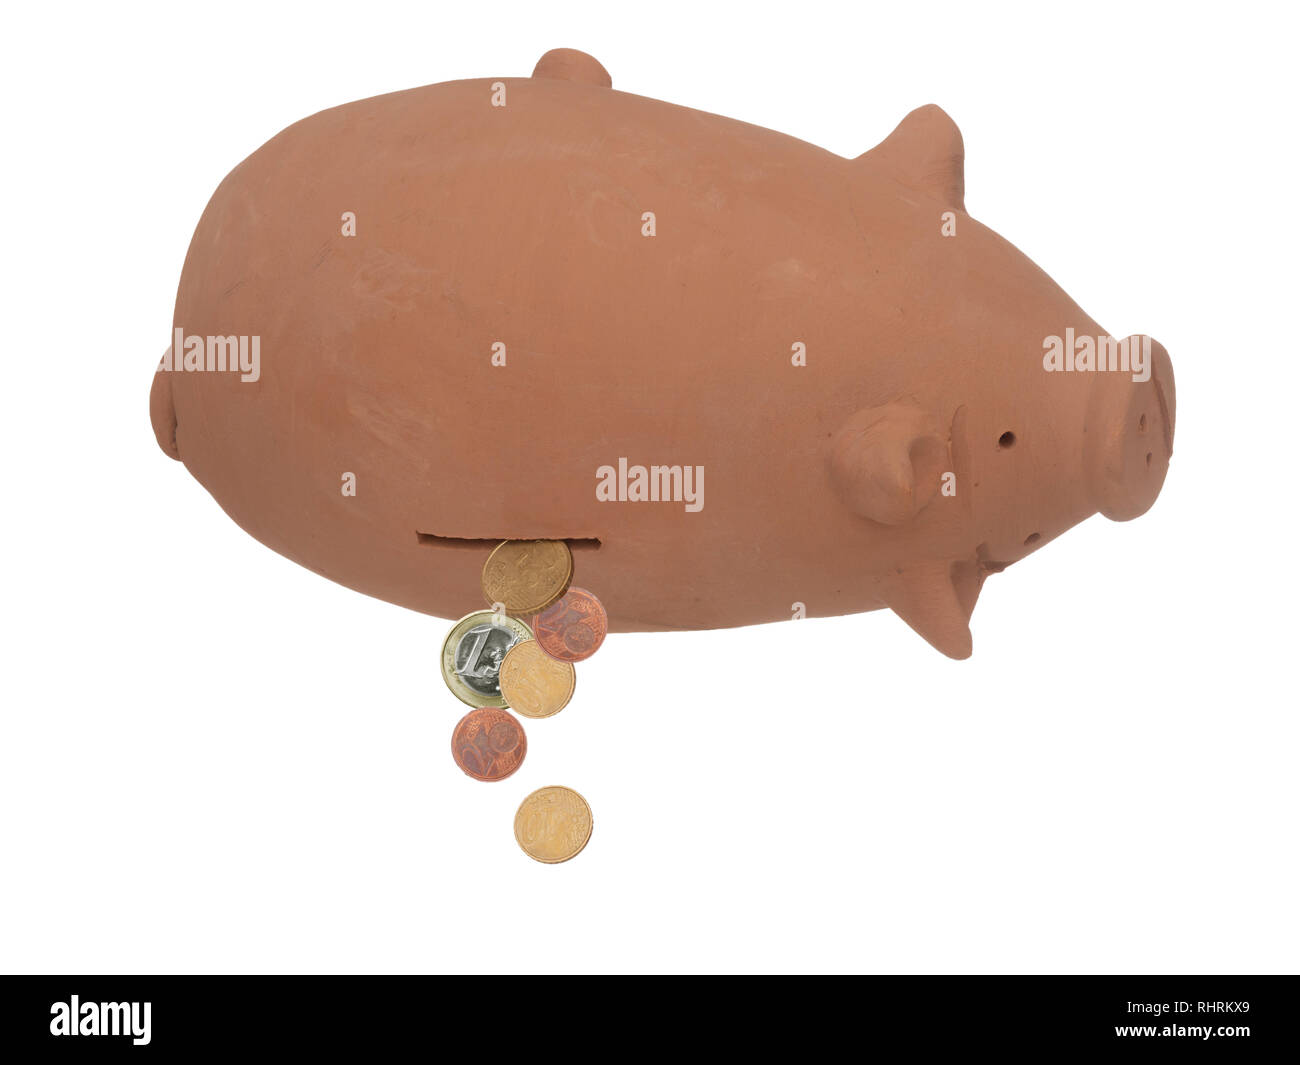 Piggy bank, money box upside down, few Euro coins falling out. EU financial crisis etc. Banking, budget concept. Isolated on white. Stock Photo